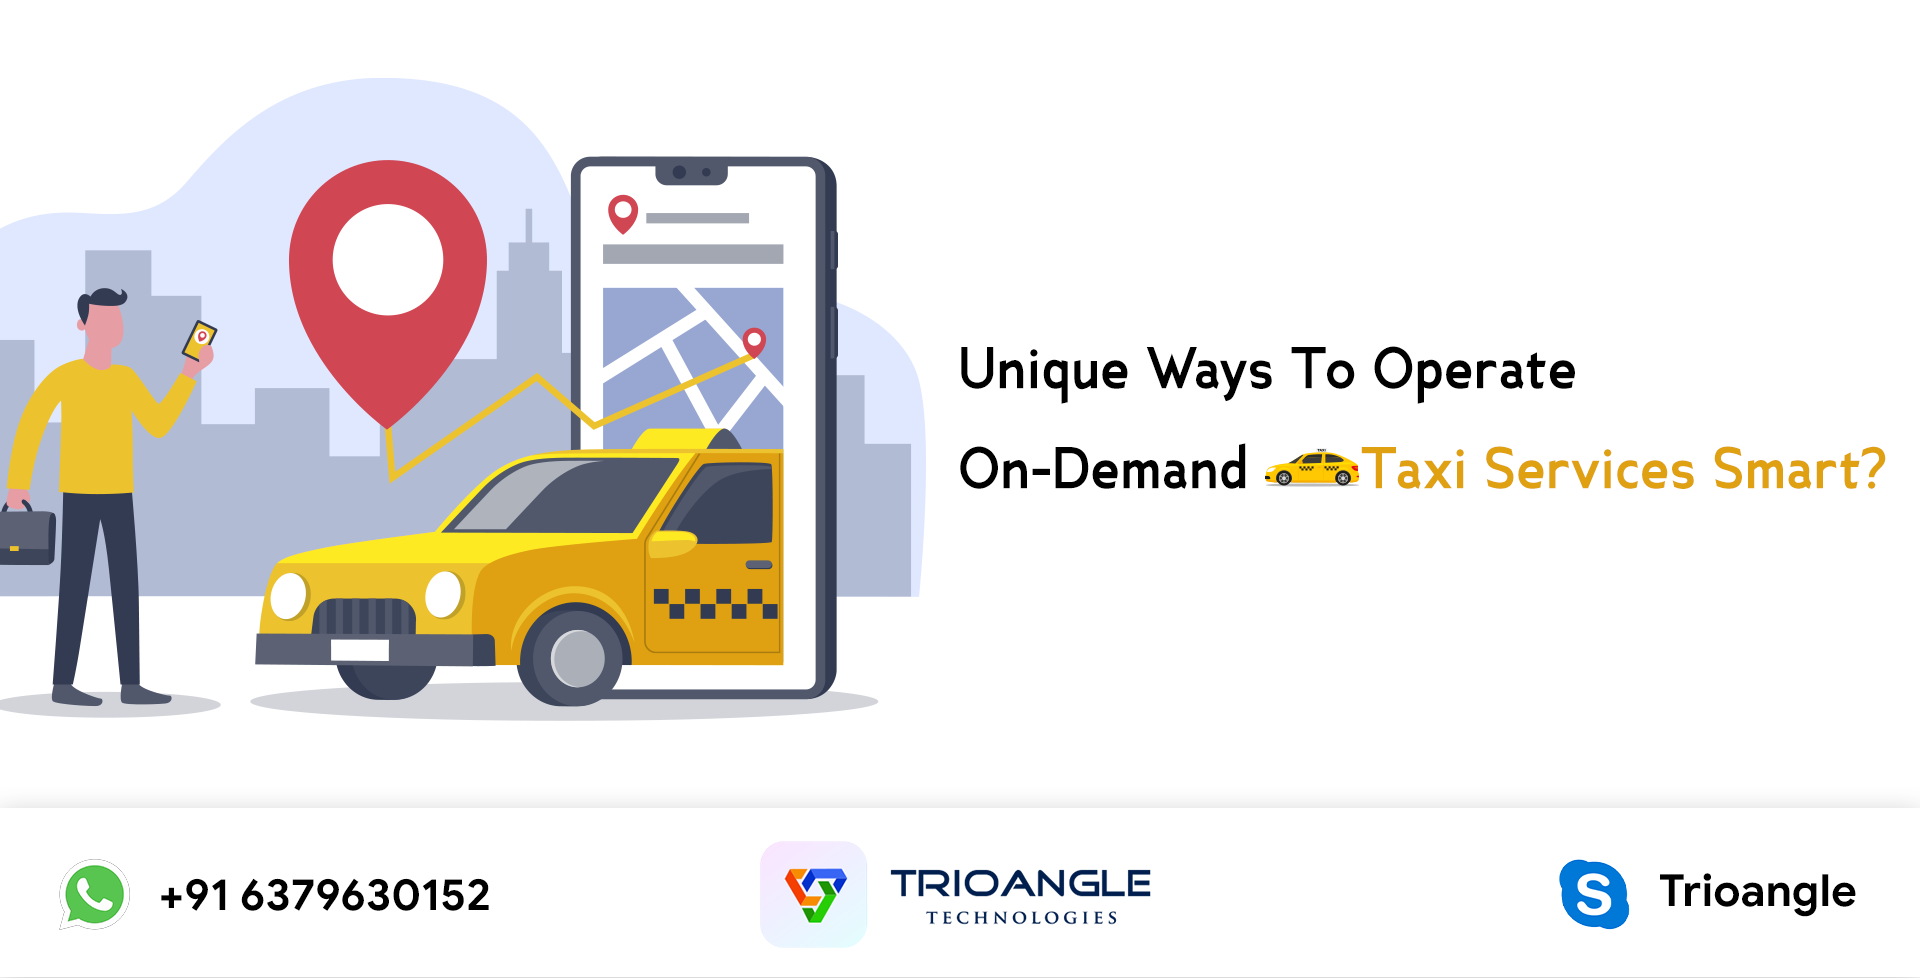 Unique Ways To Operate On-Demand Taxi Services Smart?